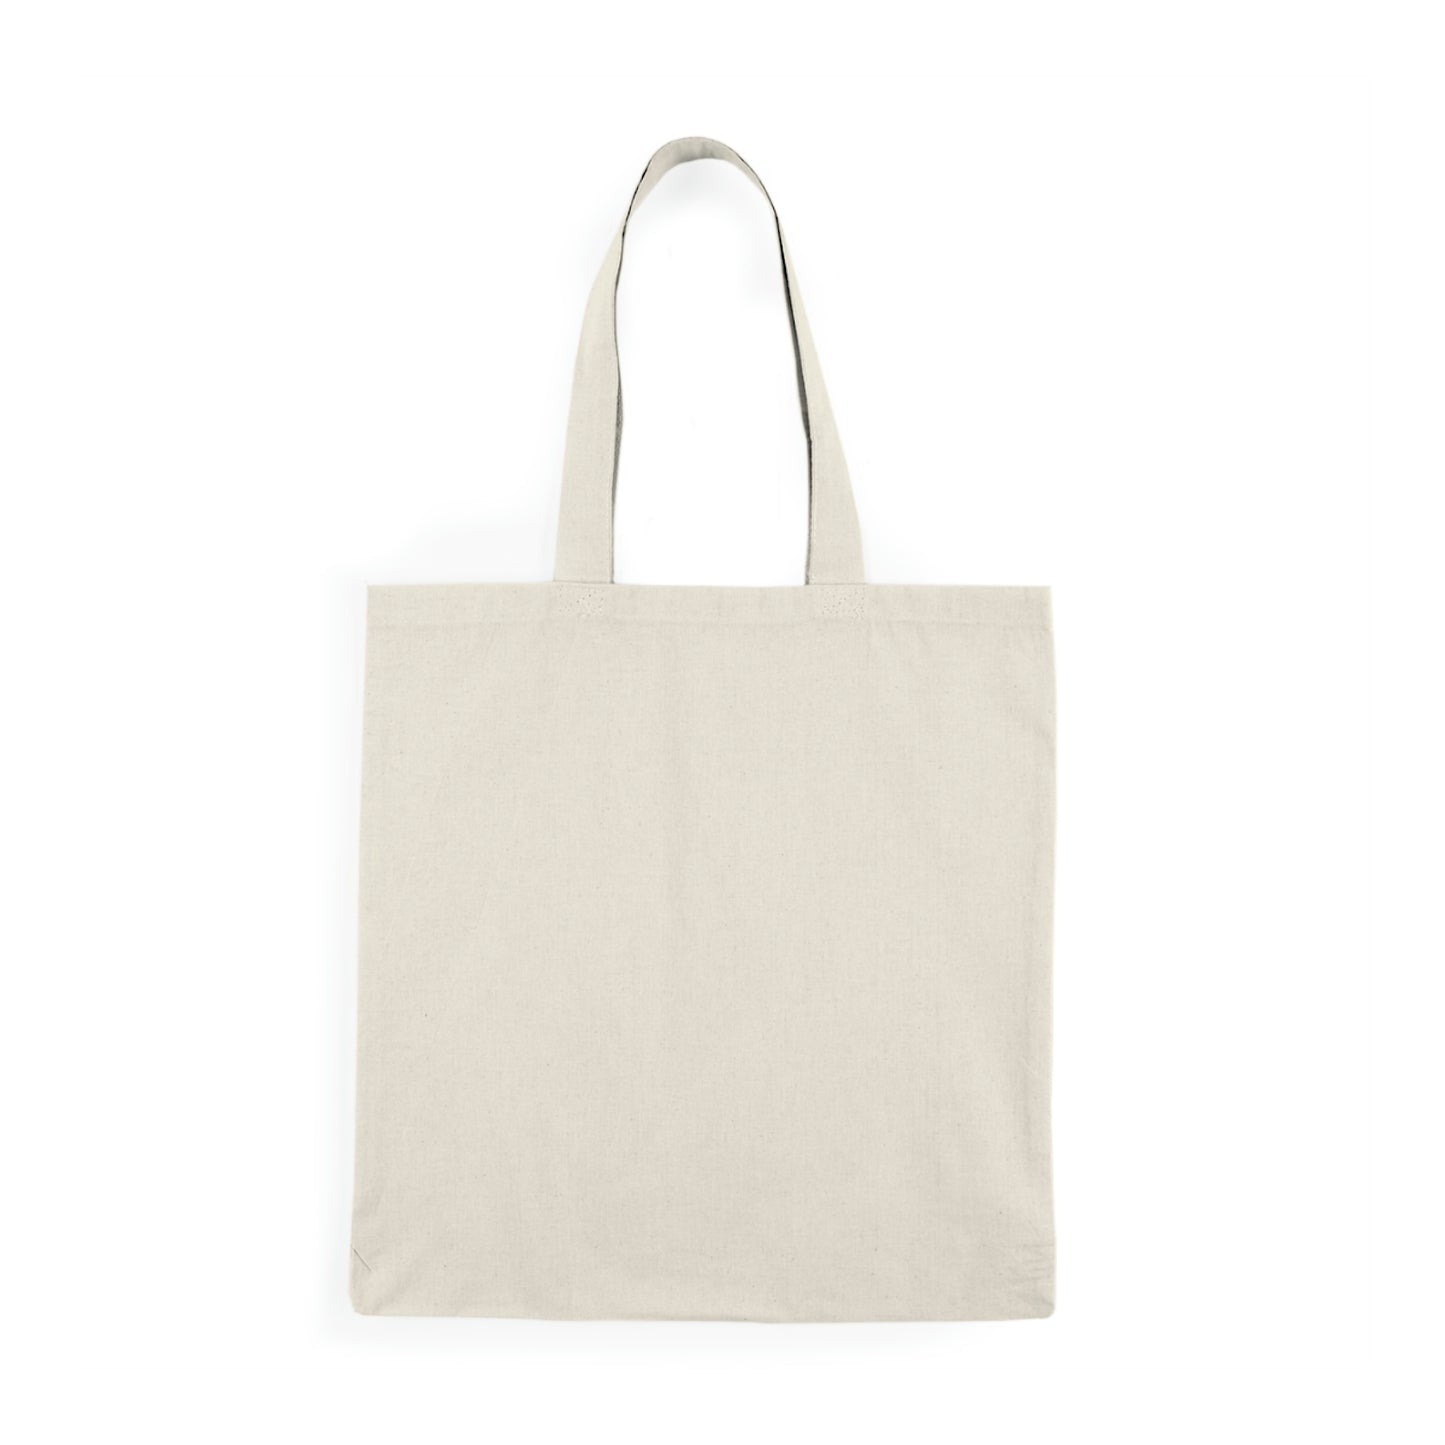 Ashes to Ashes - Natural Tote Bag